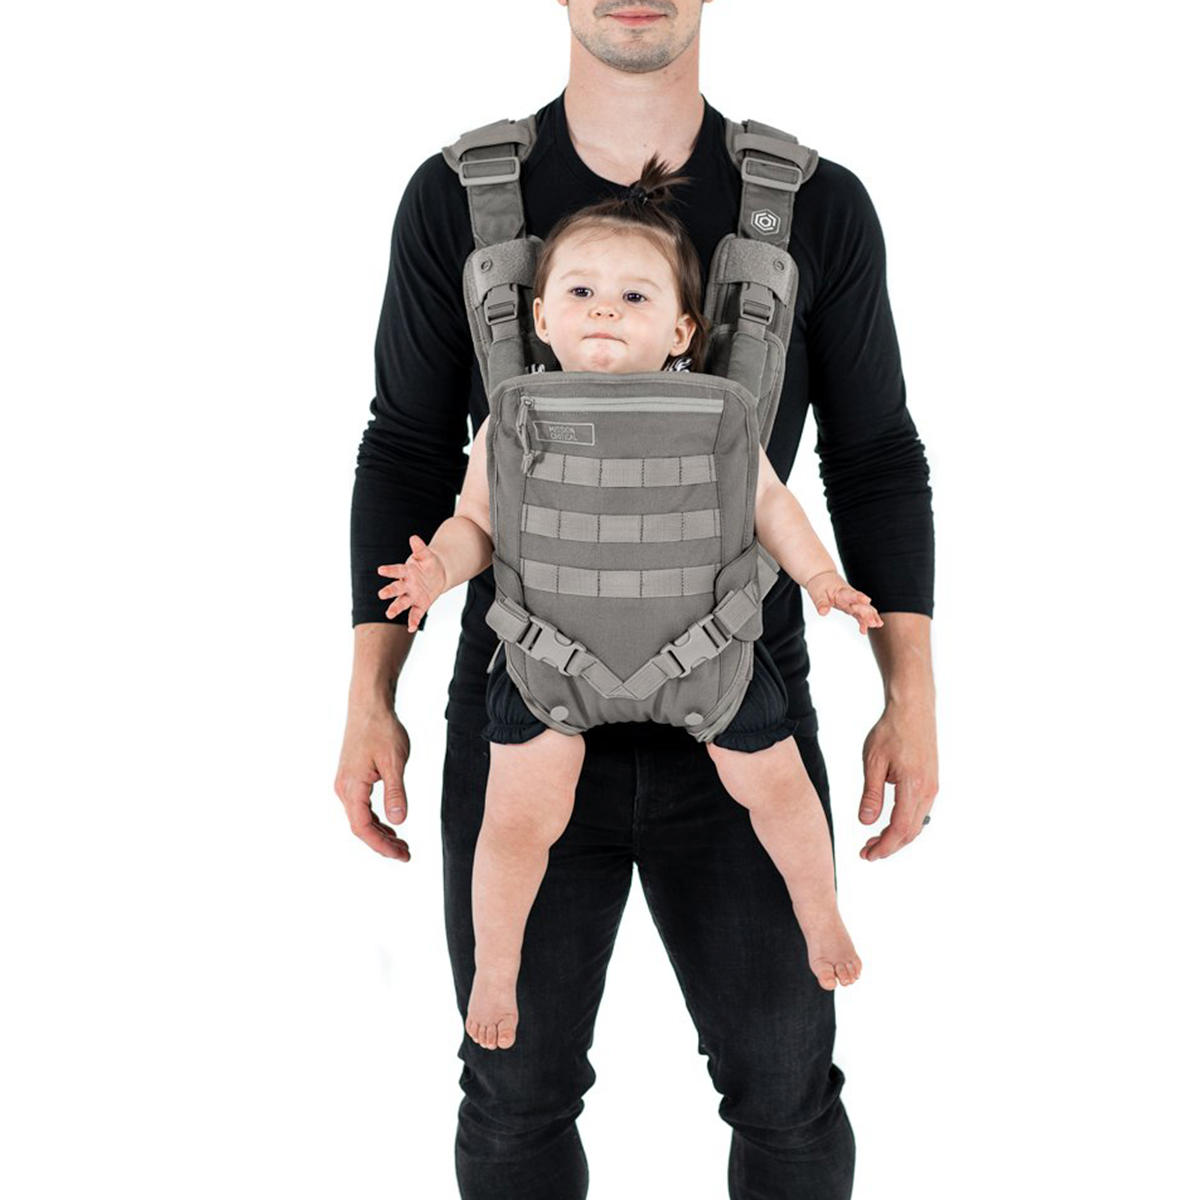 Mission Critical S.01 Action Baby Carrier, Baby Gear for Dads (Gray)